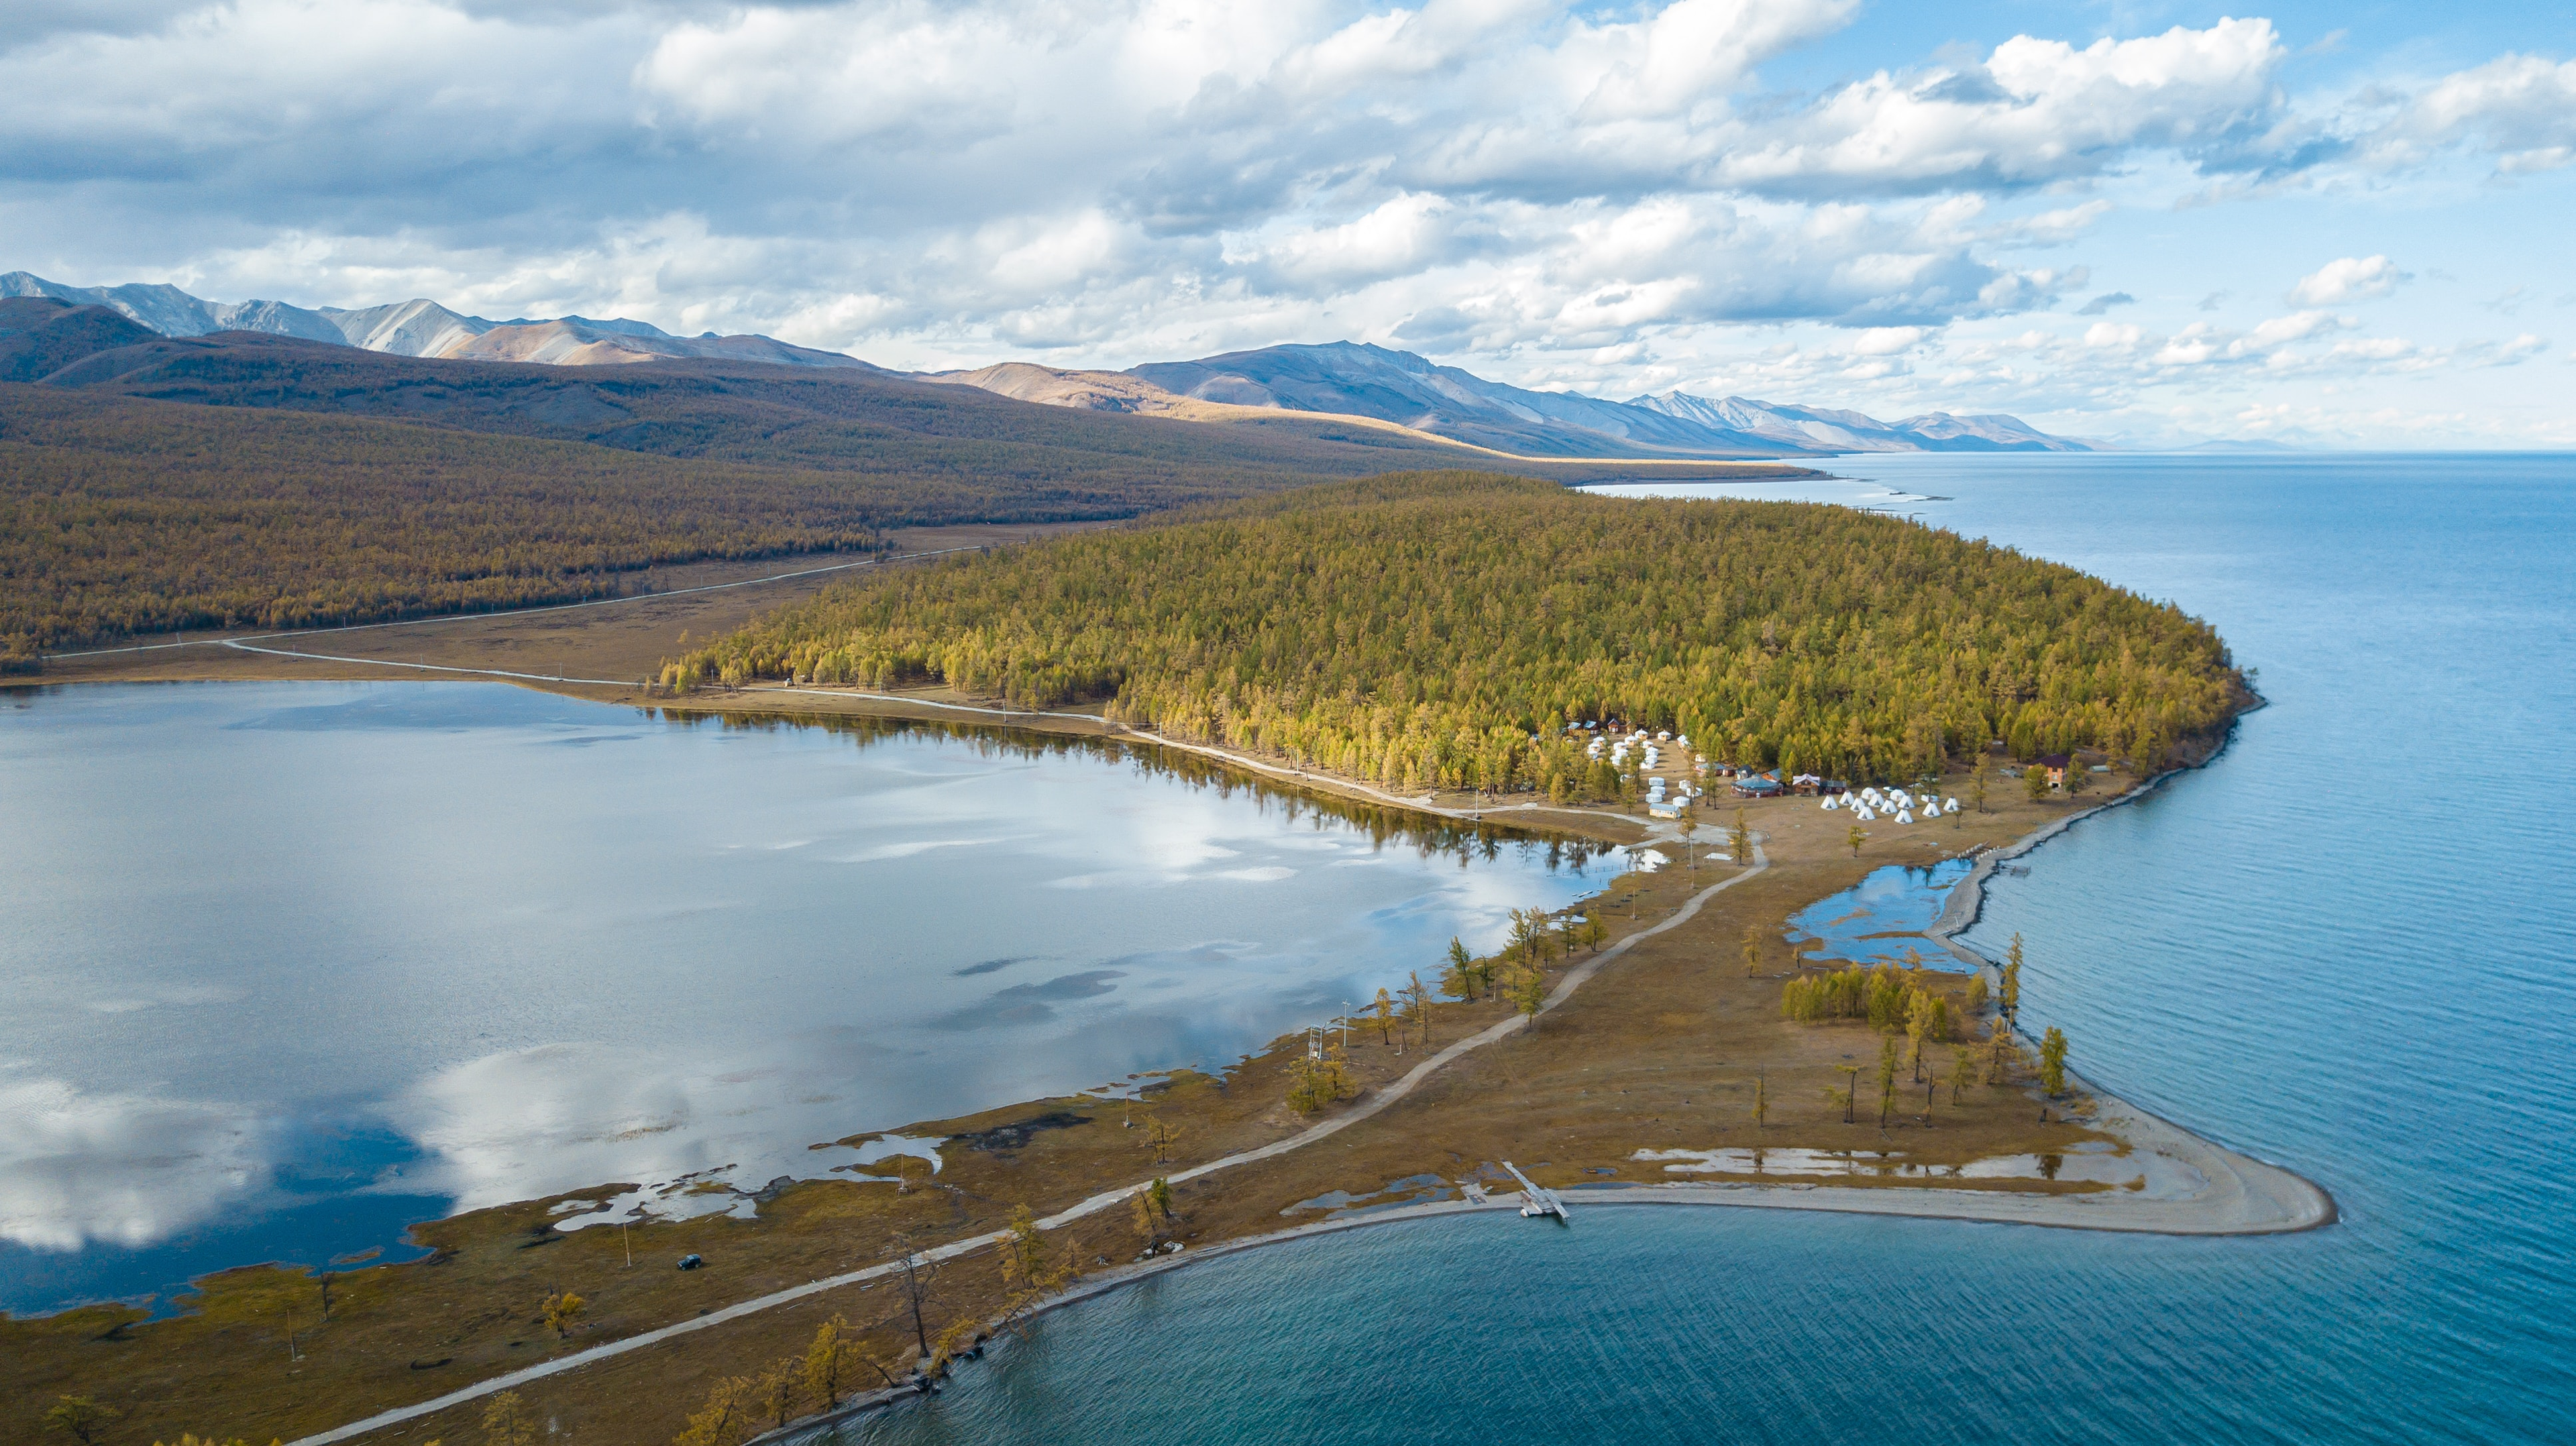 A ger camp on the shore of Lake Khuvsgul called Tolgoit sits between the big Khuvsgul and a smaller lake